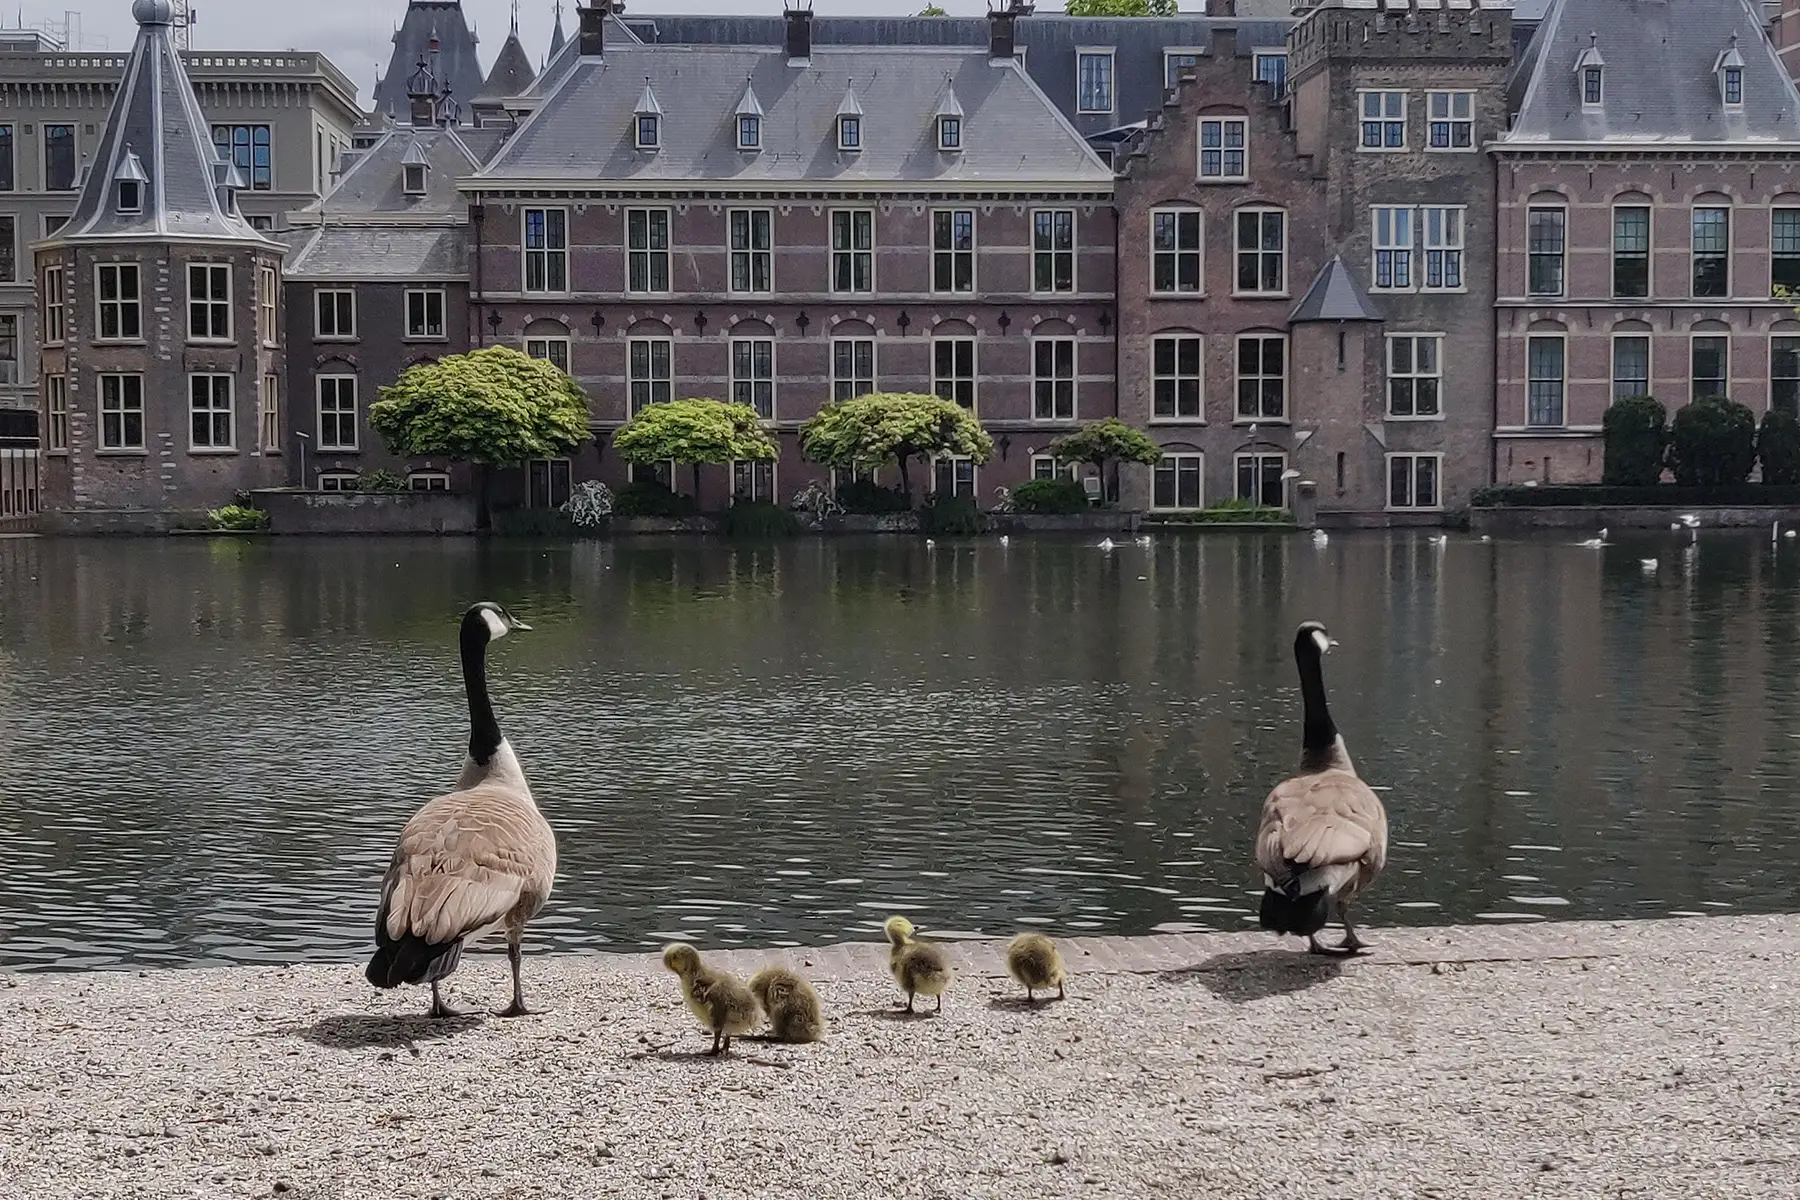 Geese by the Hofvijver, a pond next to Parliament in The Hague